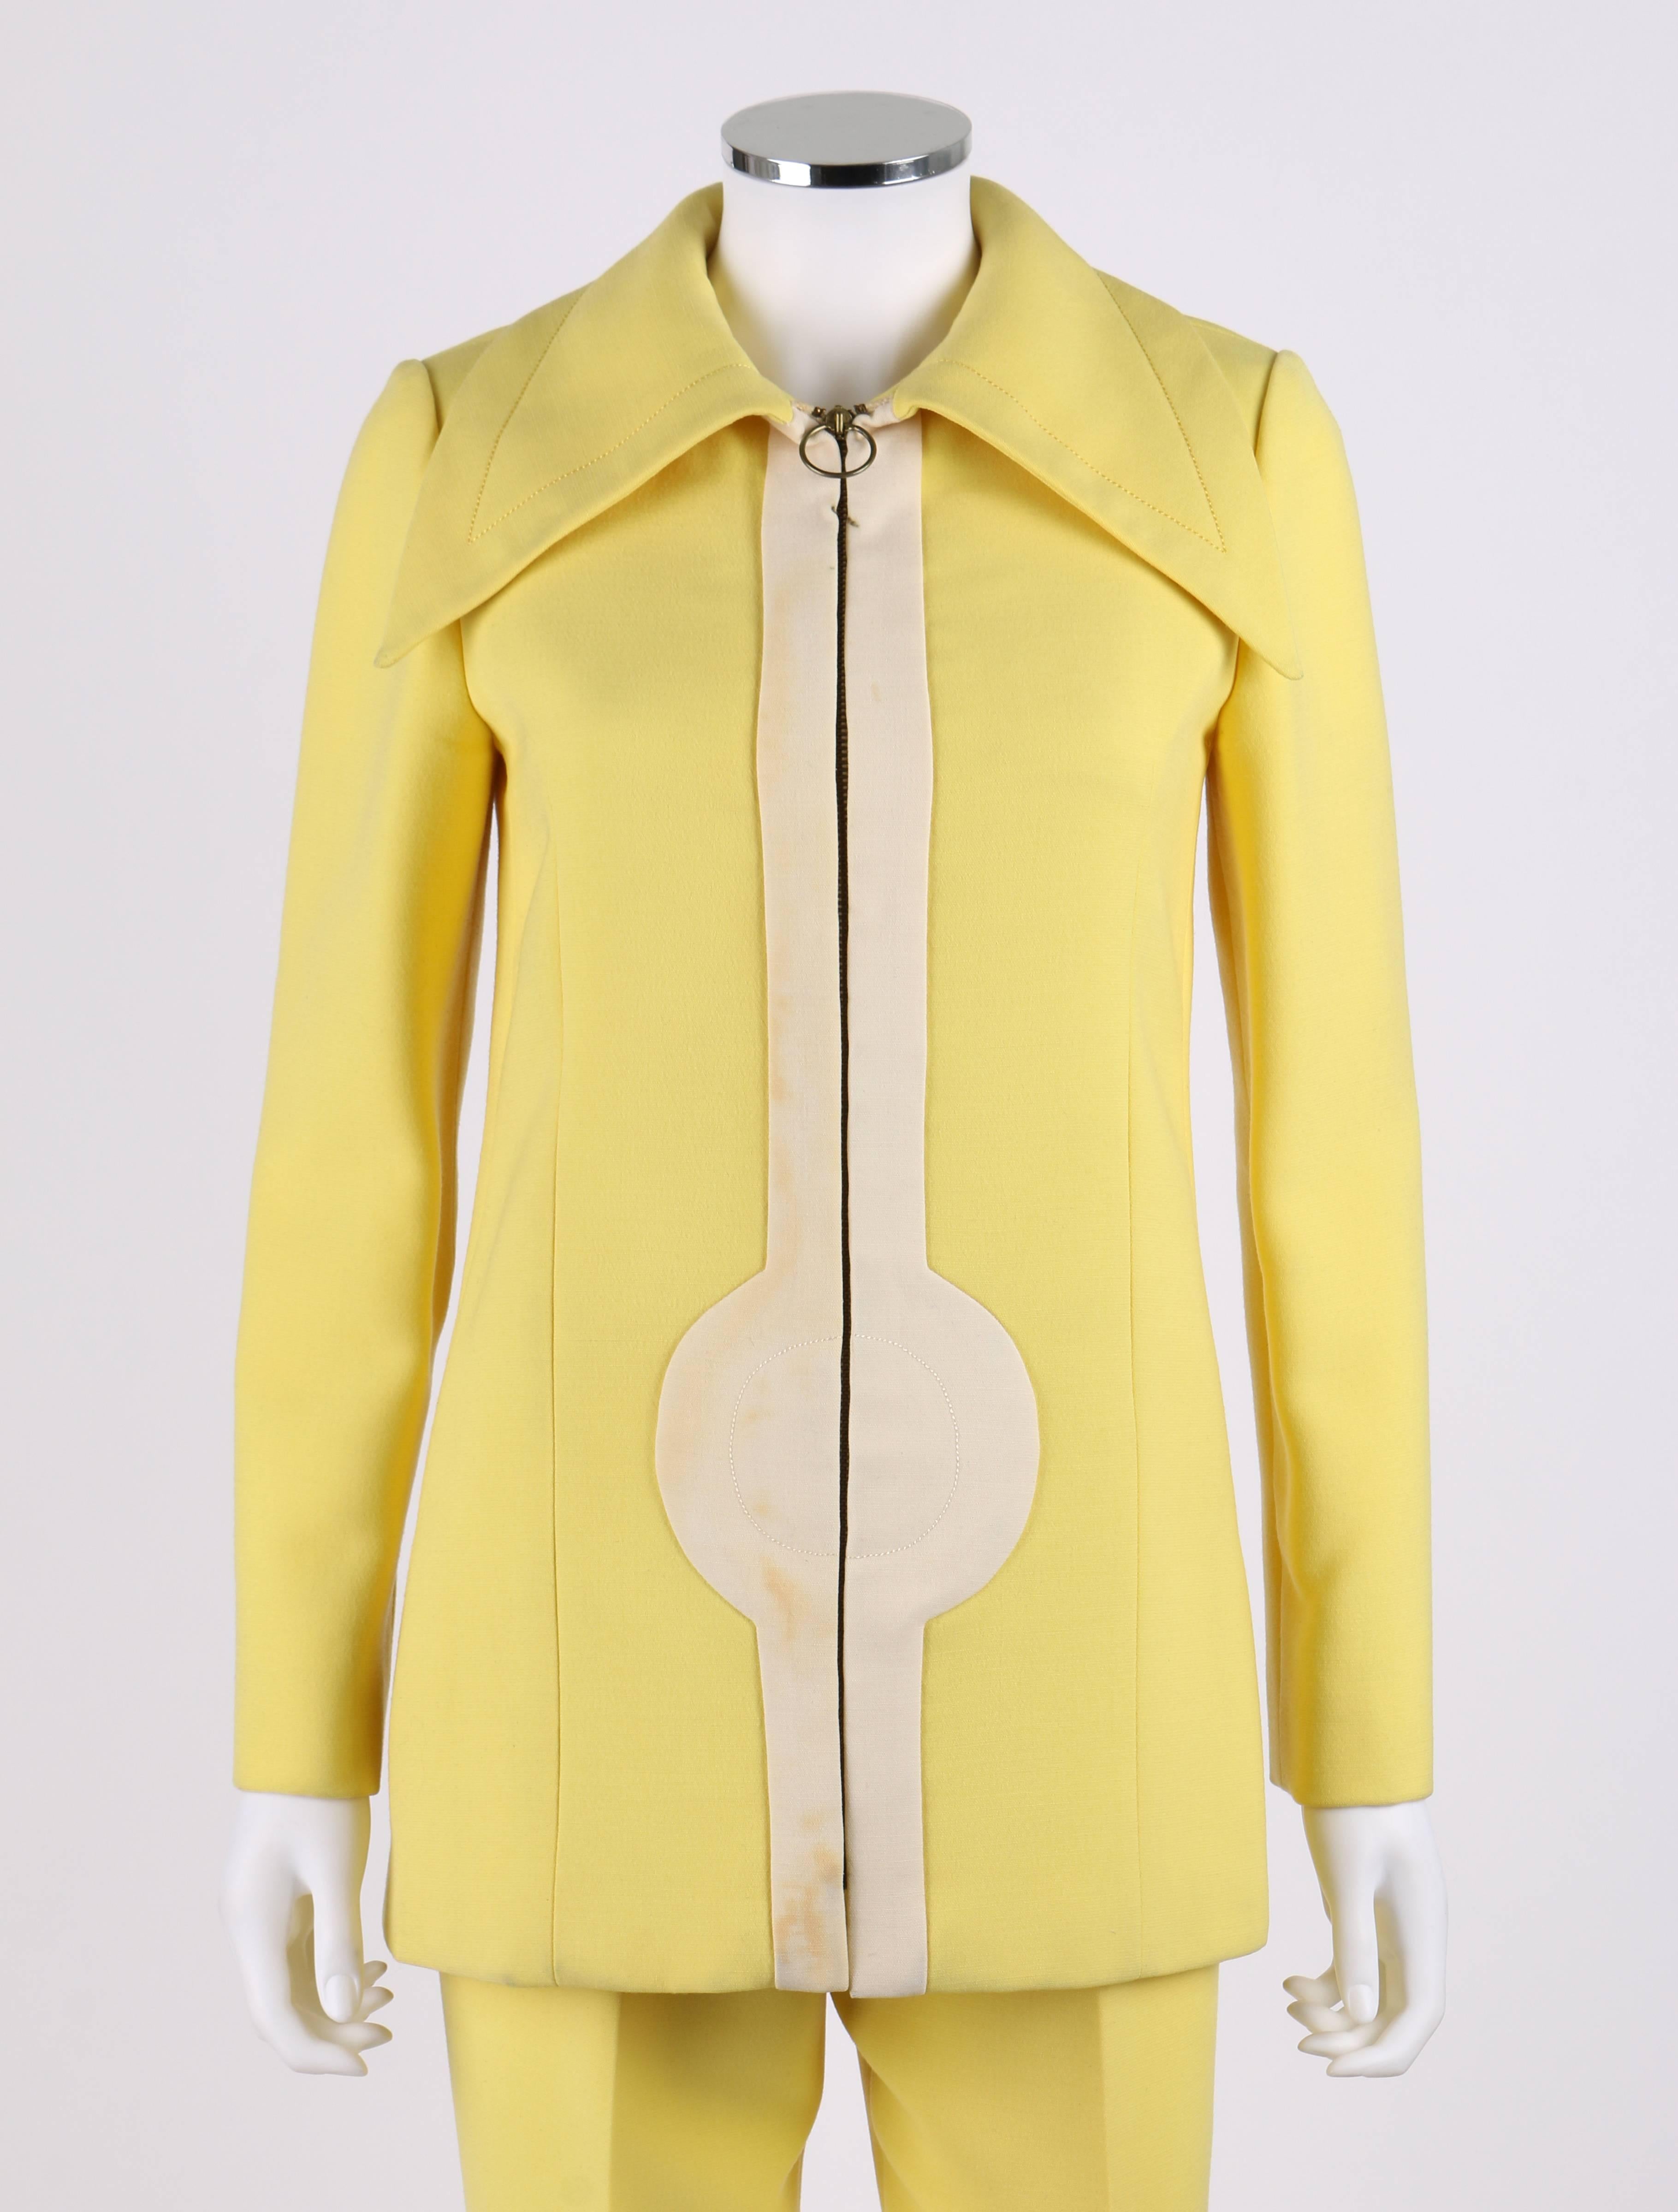 Vintage c.1960's Pierre Cardin two piece yellow and cream zip front jacket and pants suit set. Yellow jacket has signature pop art inspired white detail down center front zipper closure. Large spread collar. Long sleeves. Two hip pockets. Double